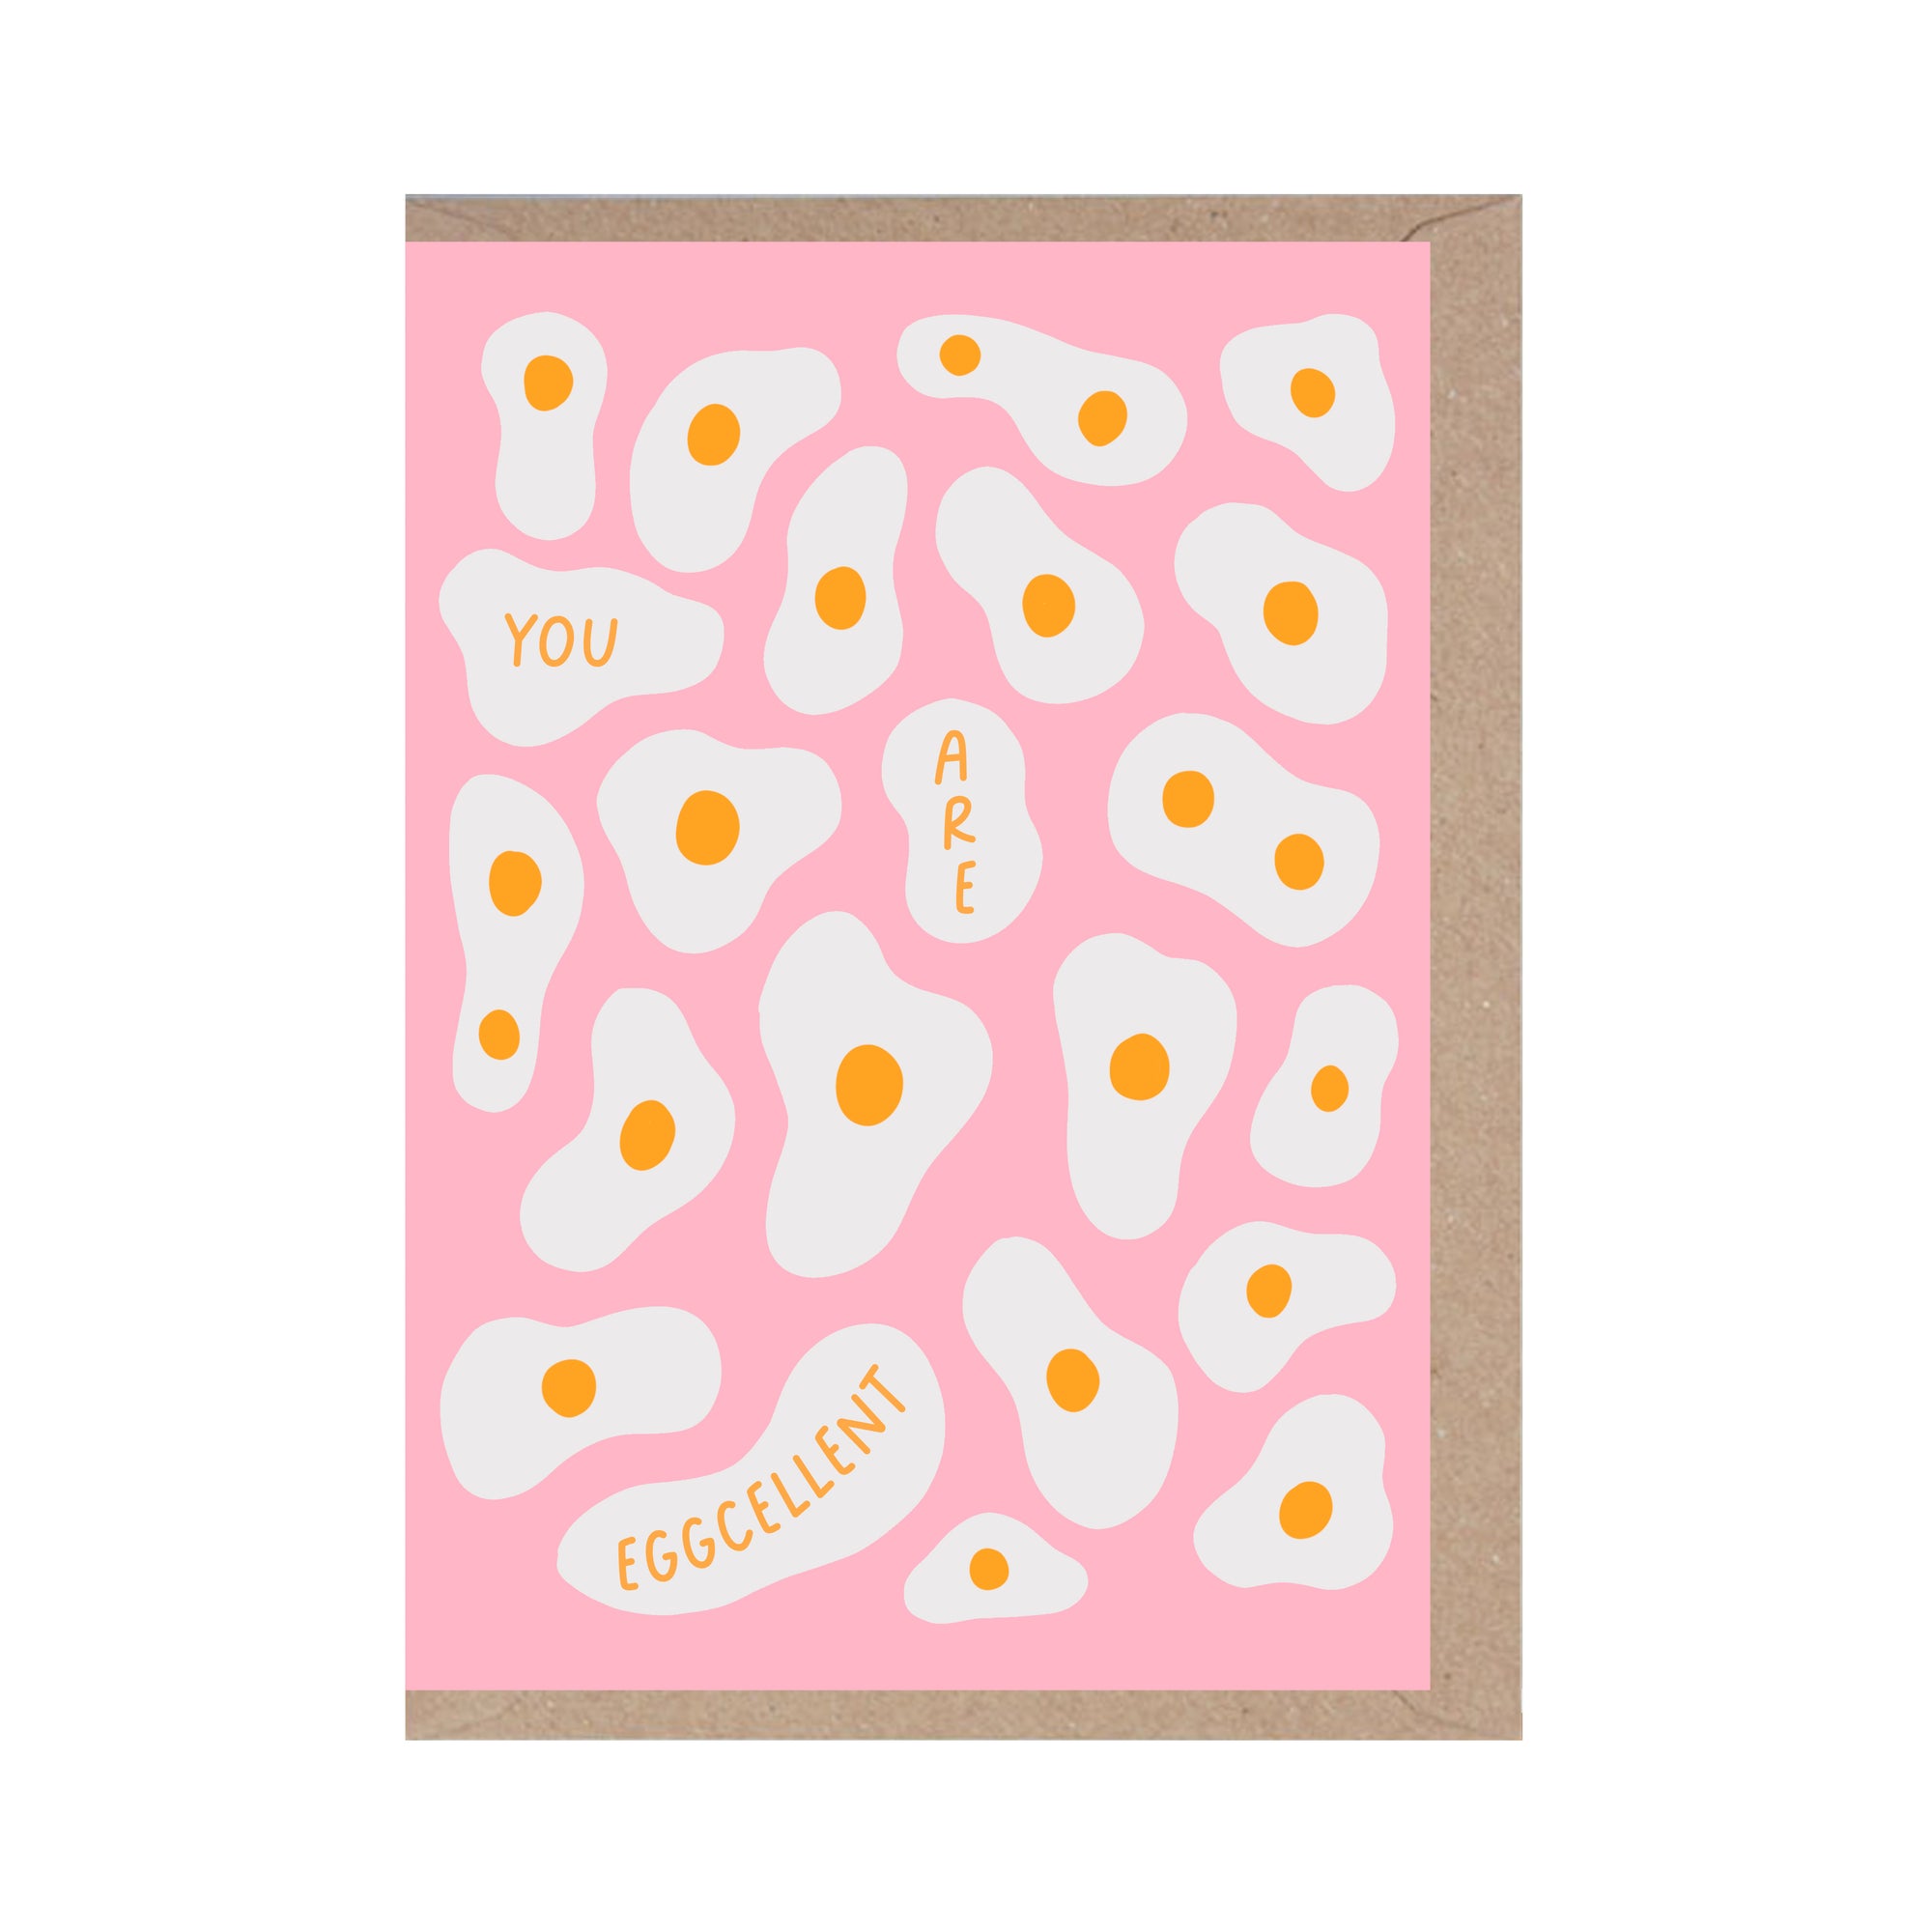 You Are Eggcellent Funny Valentine Card - penny black